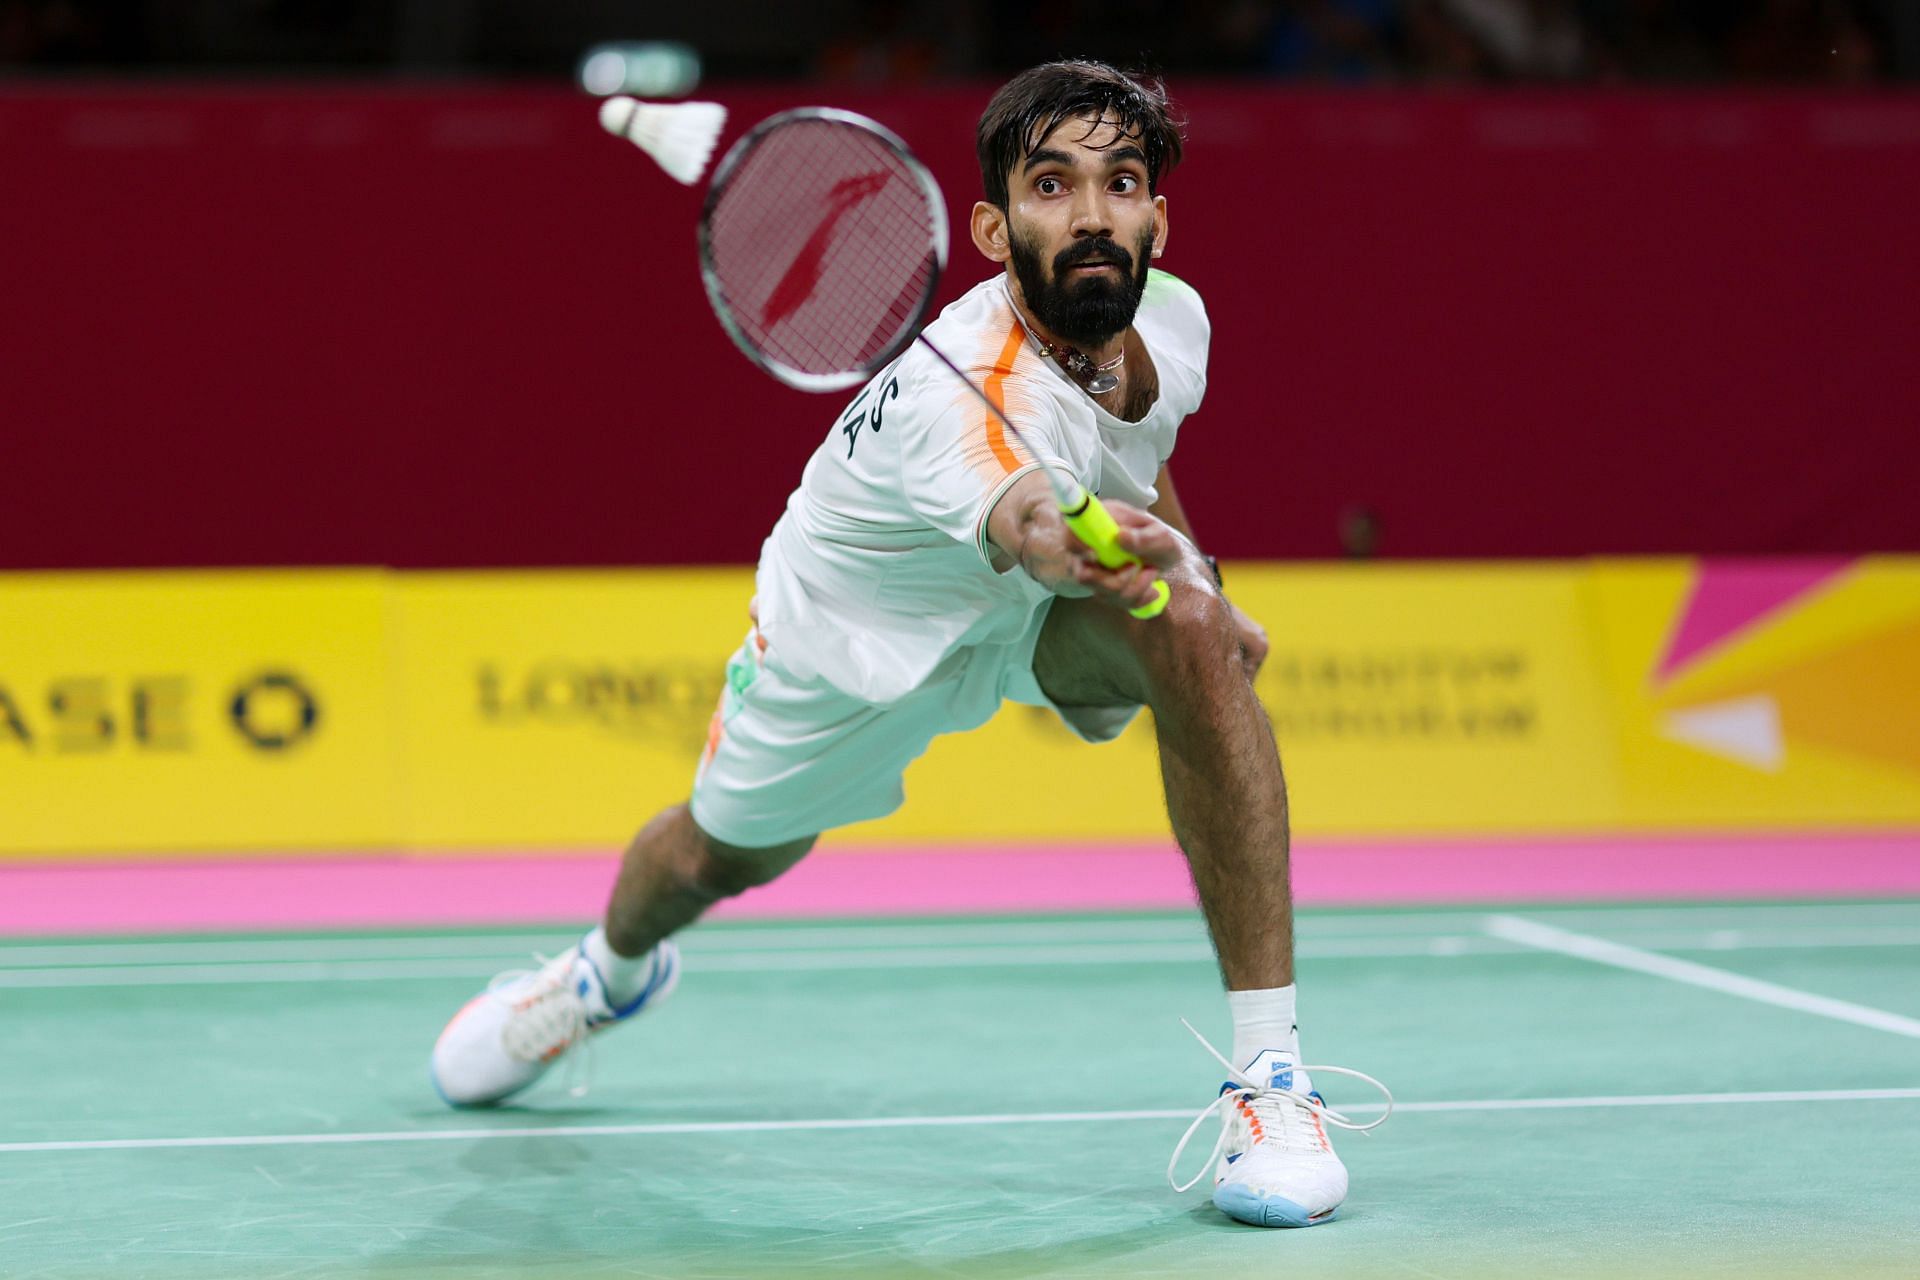 Kidambi Srikanth in action at the 2022 Commonwealth Games (Image courtesy: Getty)